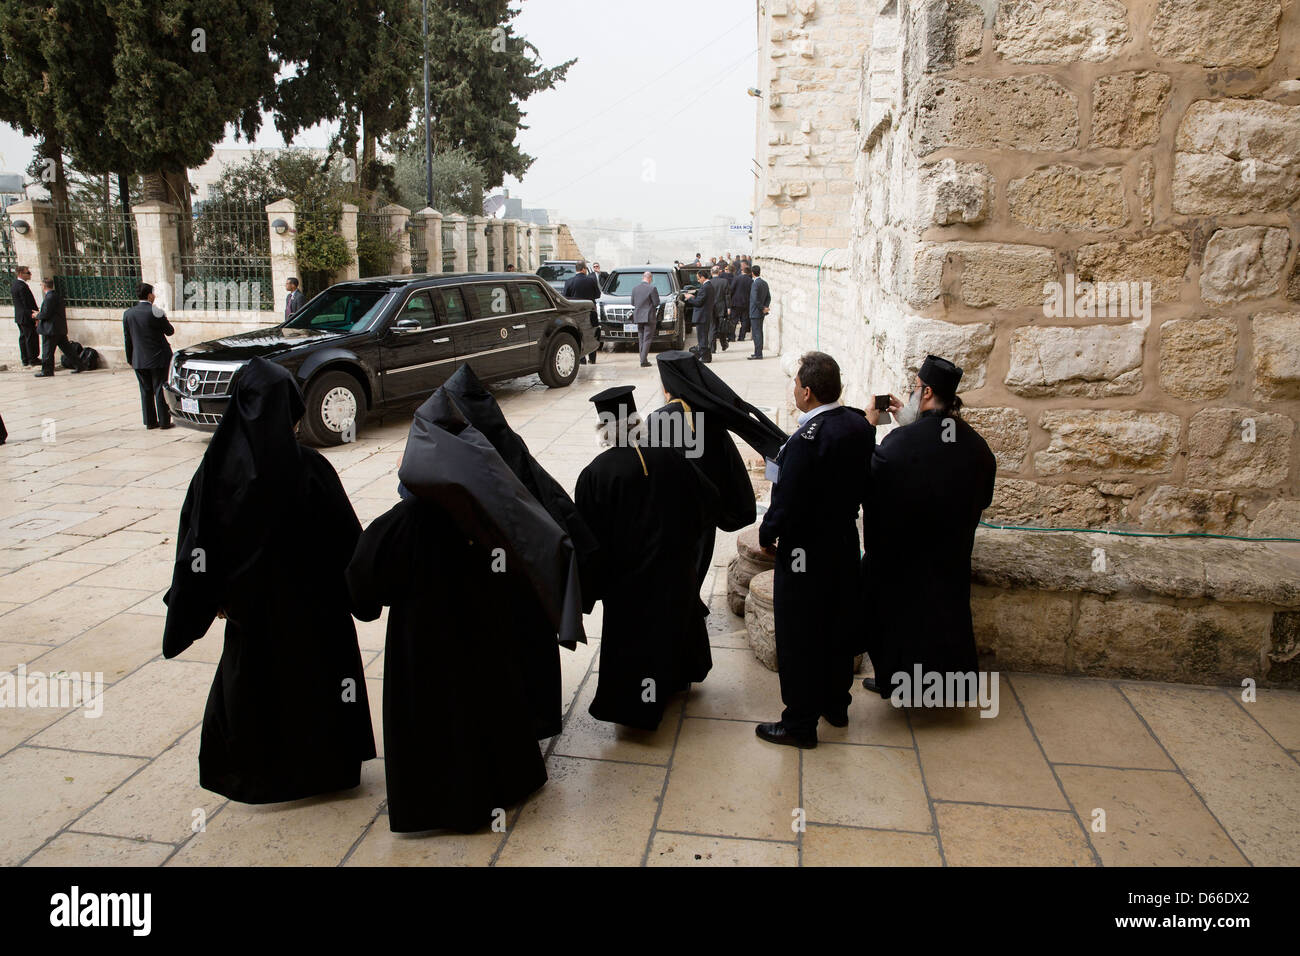 Clergy watch as the US President's motorcade prepares to depart the Church of the Nativity March 22, 2013 in Bethlehem, the West Bank. Stock Photo